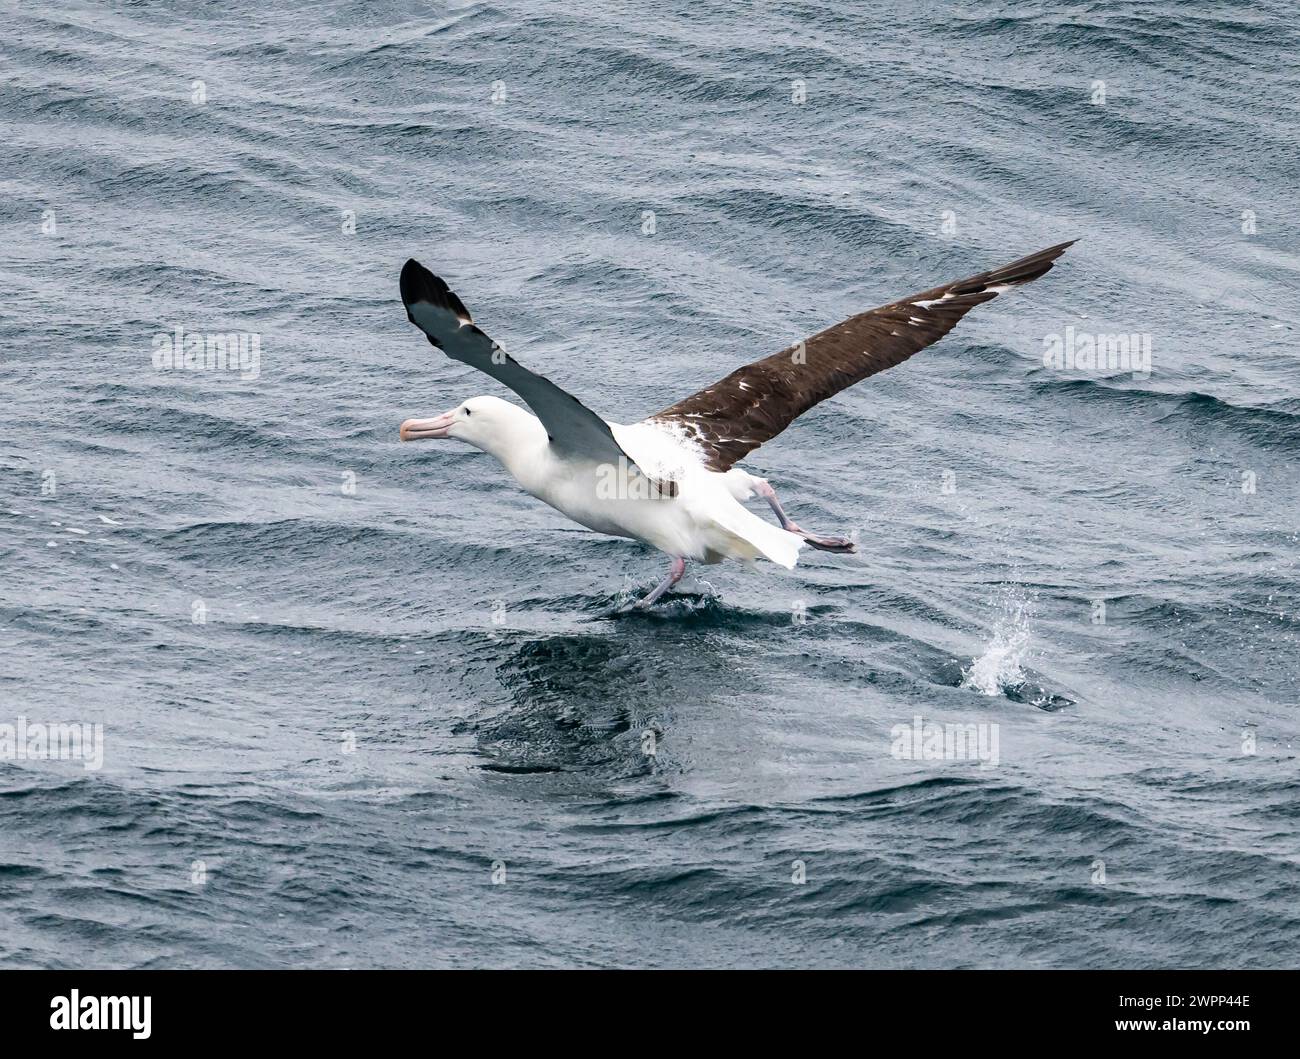 A Northern Royal Albatross (Diomedea sanfordi) taking off water. Pacific Ocean, off the coast of Chile. Stock Photo